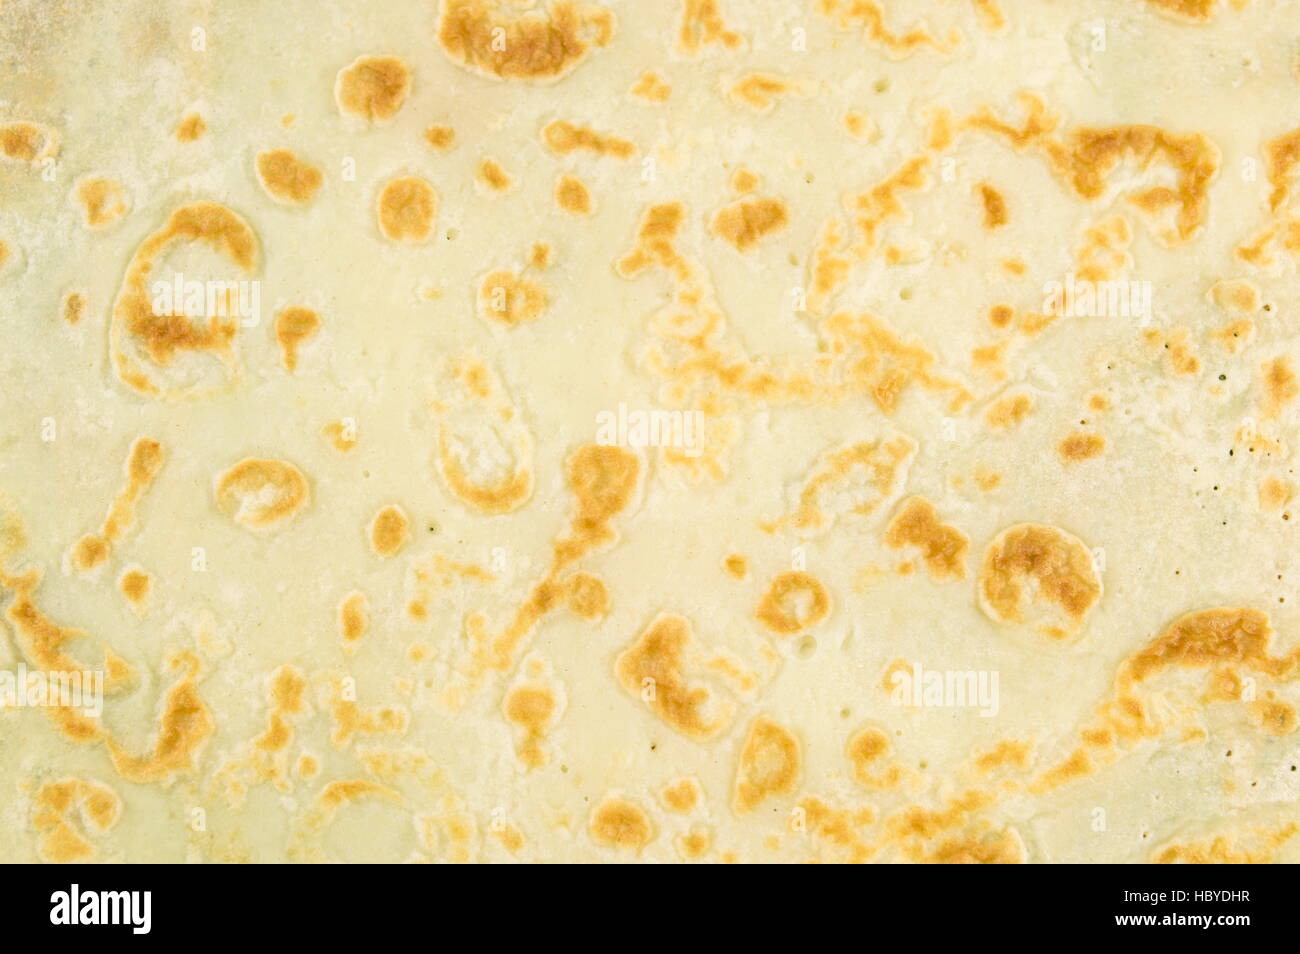 close up of a delicious homemade crepe Stock Photo